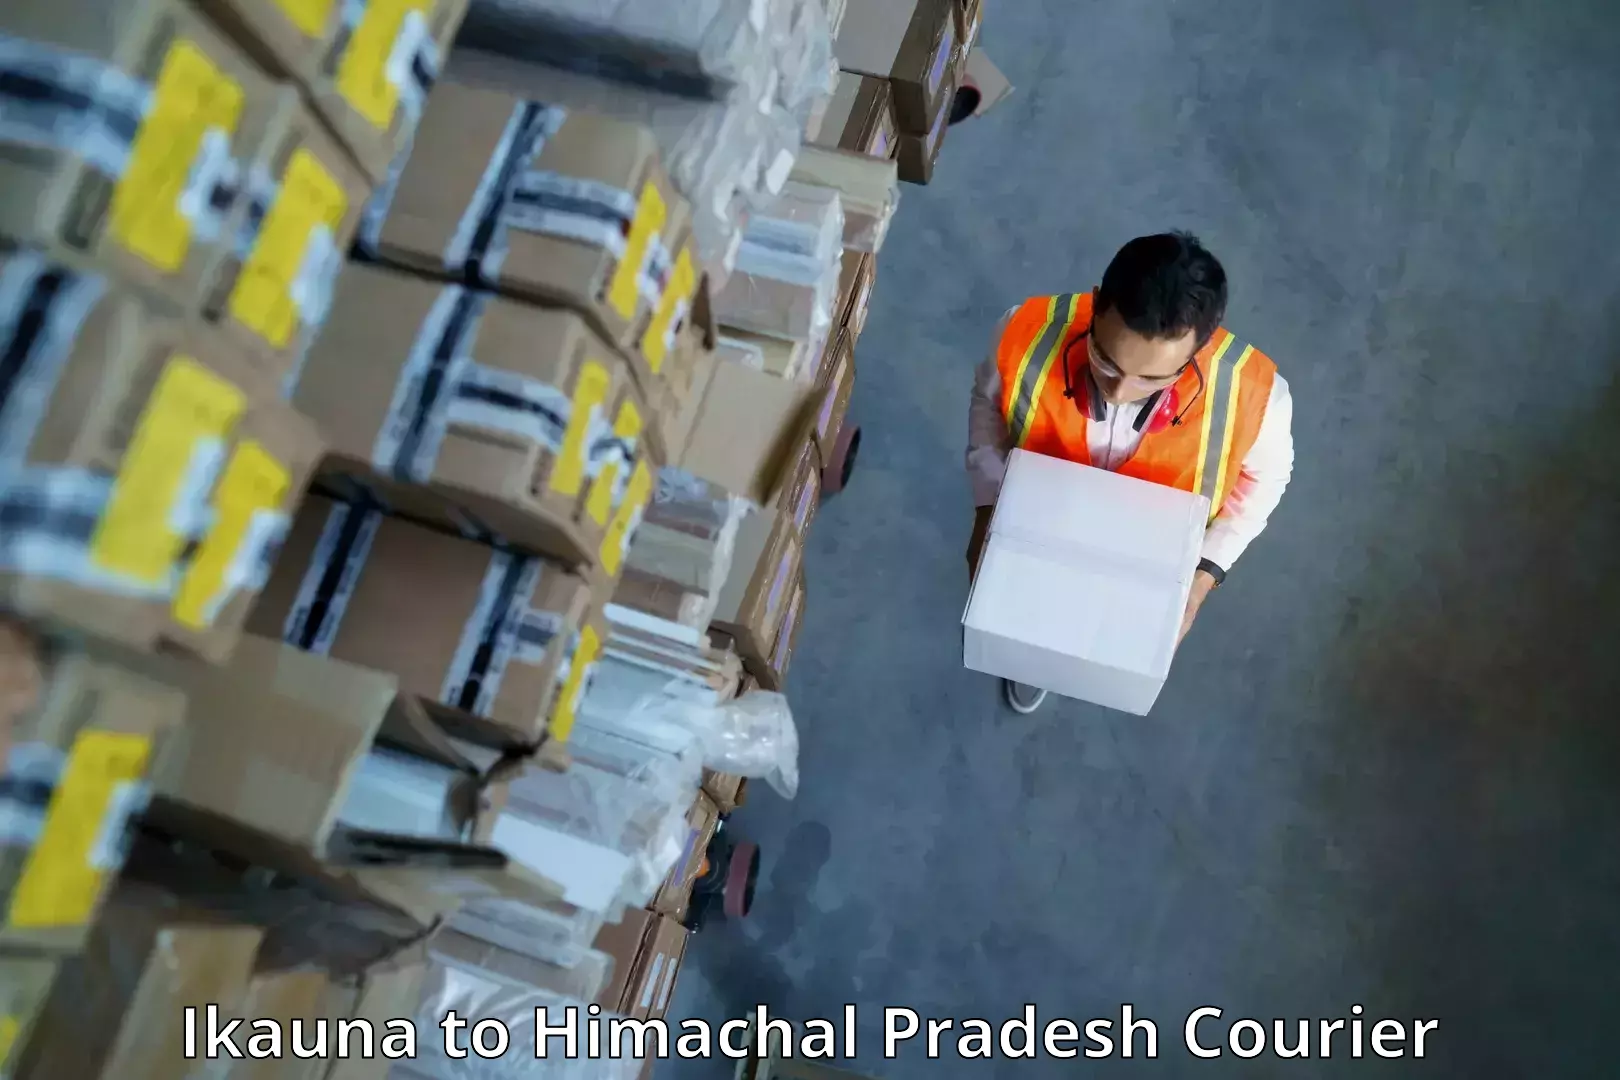 State-of-the-art courier technology Ikauna to Himachal Pradesh